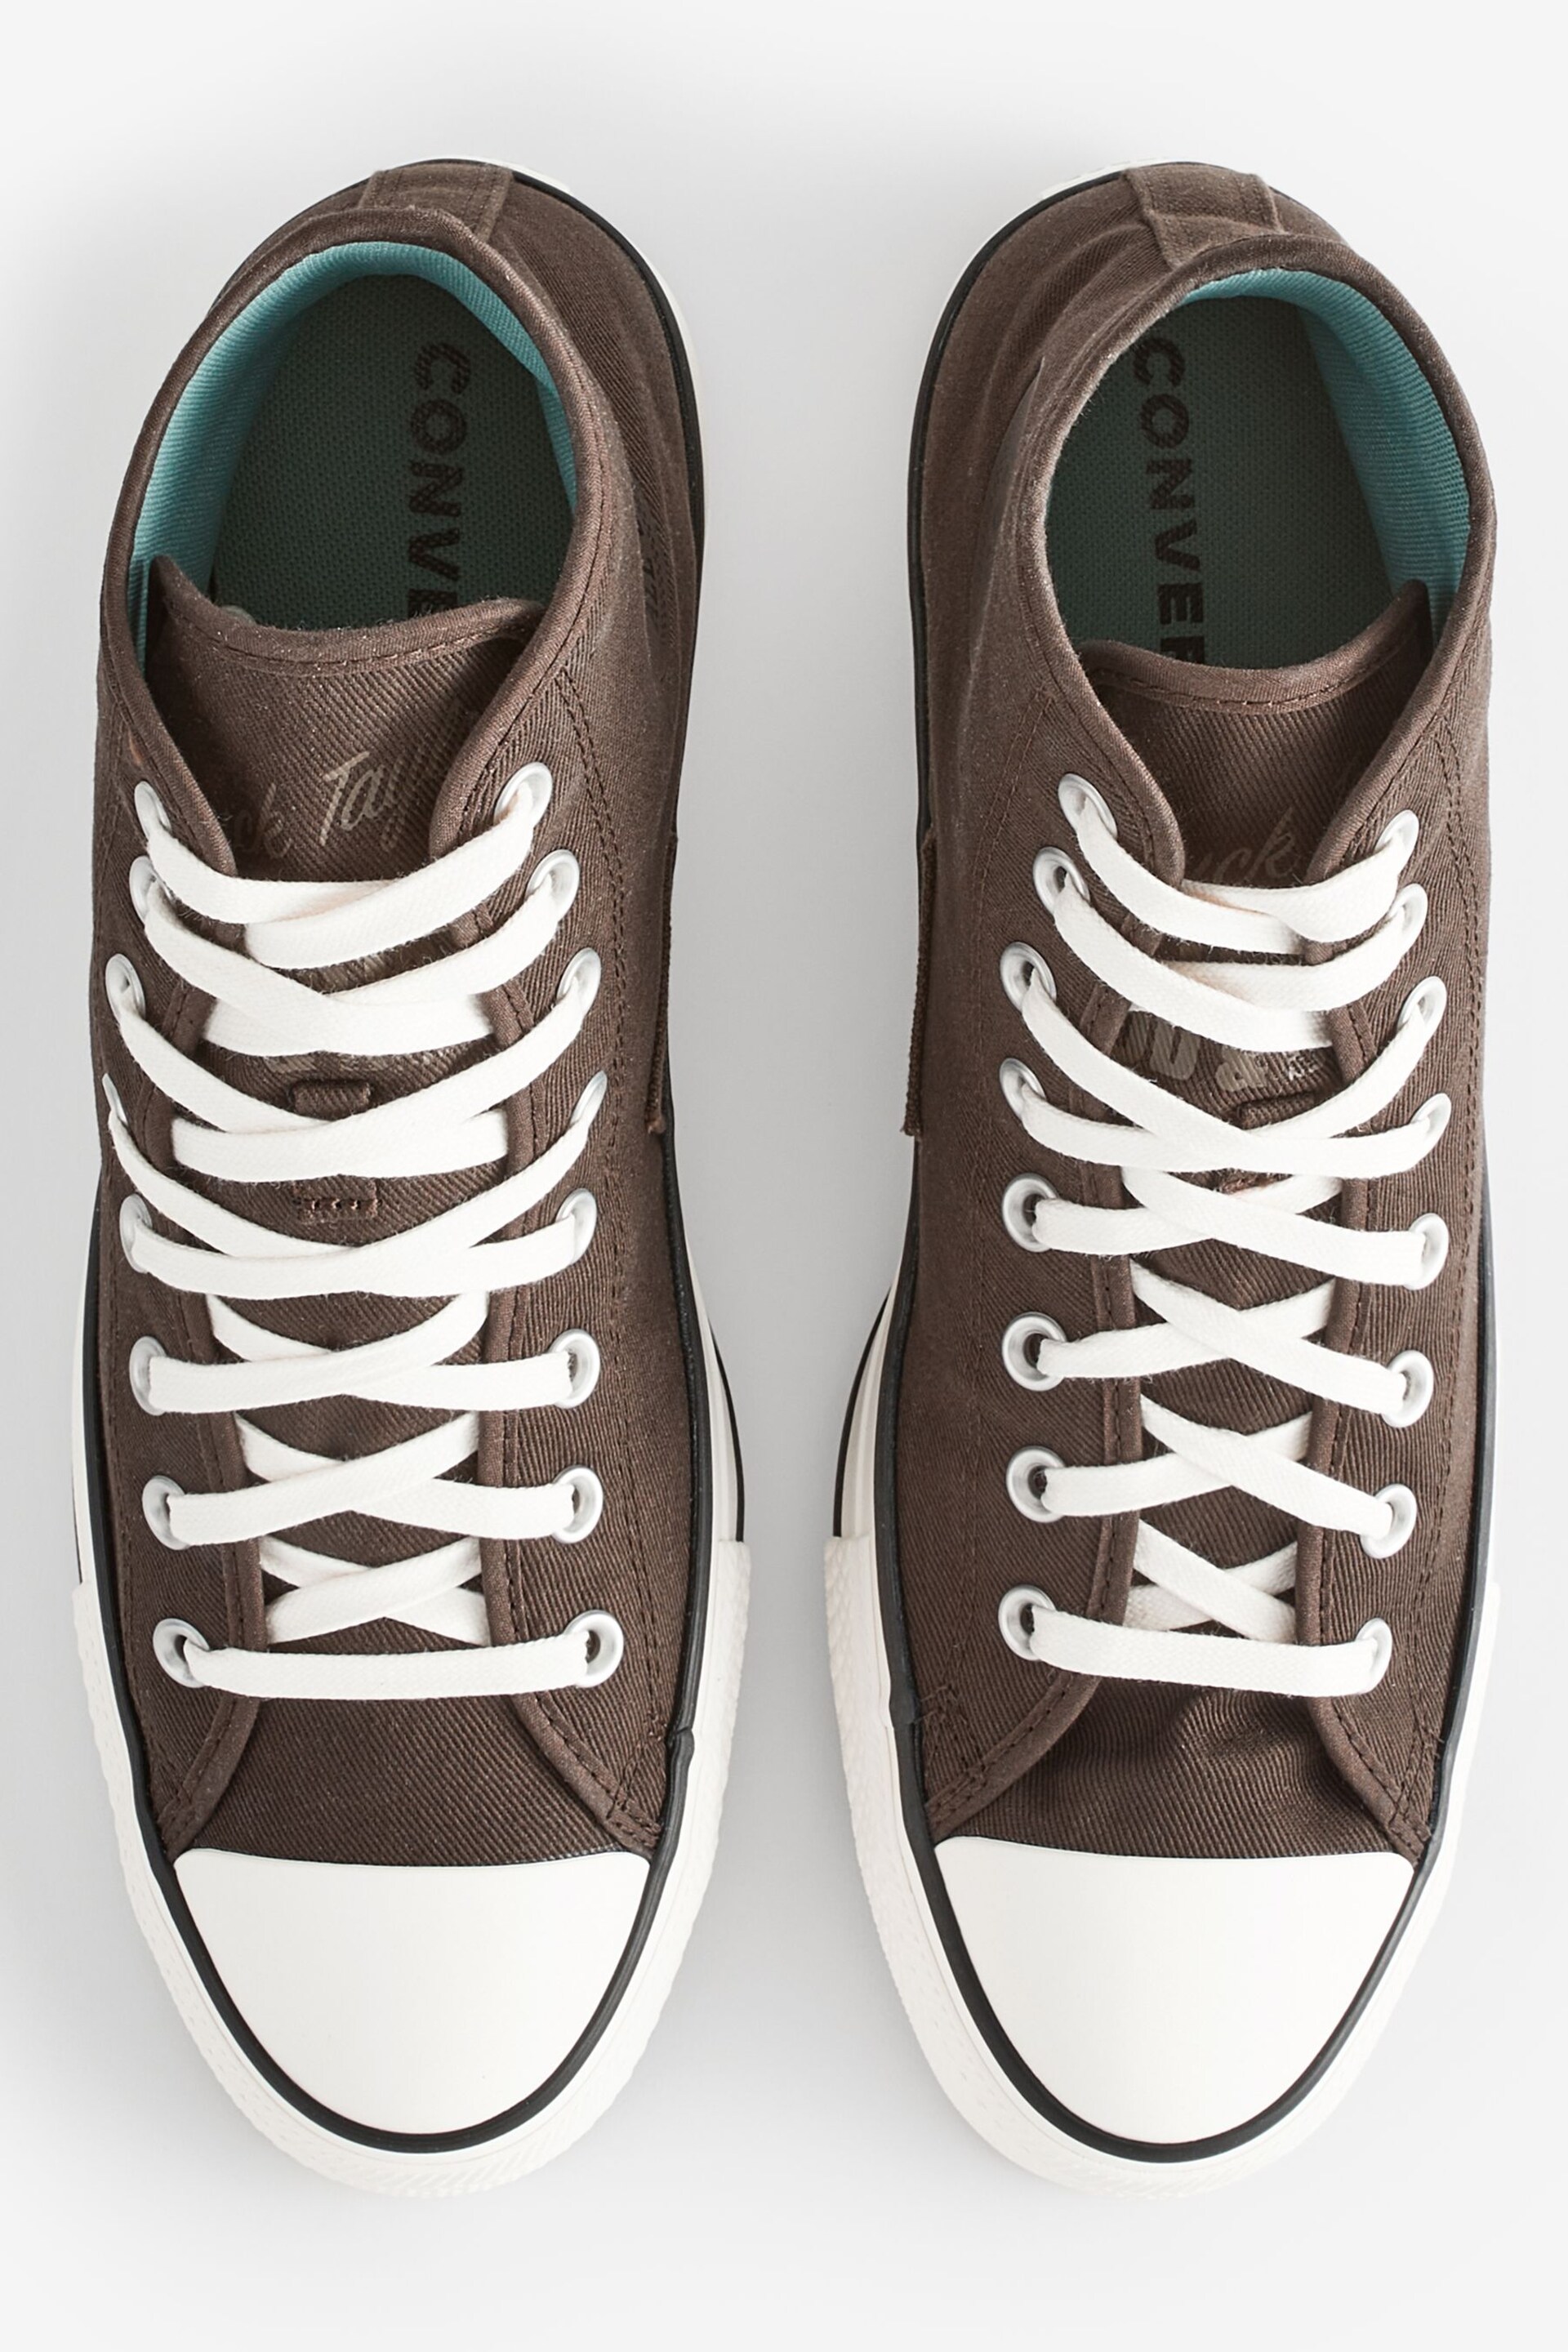 Converse Brown Chuck Taylor All Star High Top Trainers - Image 7 of 12